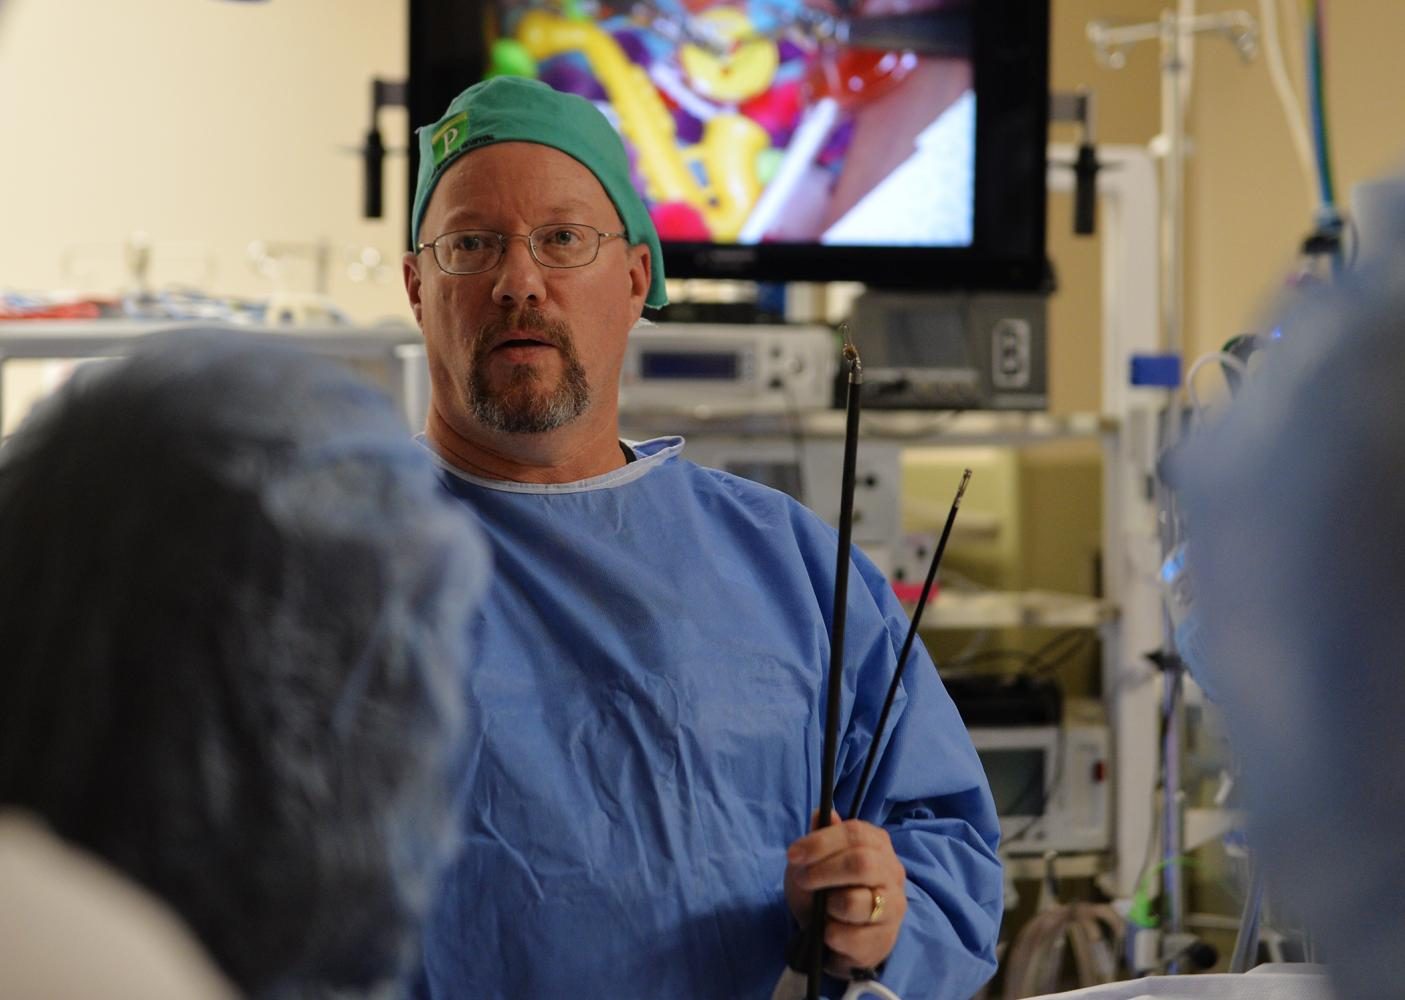 Ed Harrich, director of surgical services, talks about the da Vinci surgical robot used Friday at Pullman Regional Hospital.
